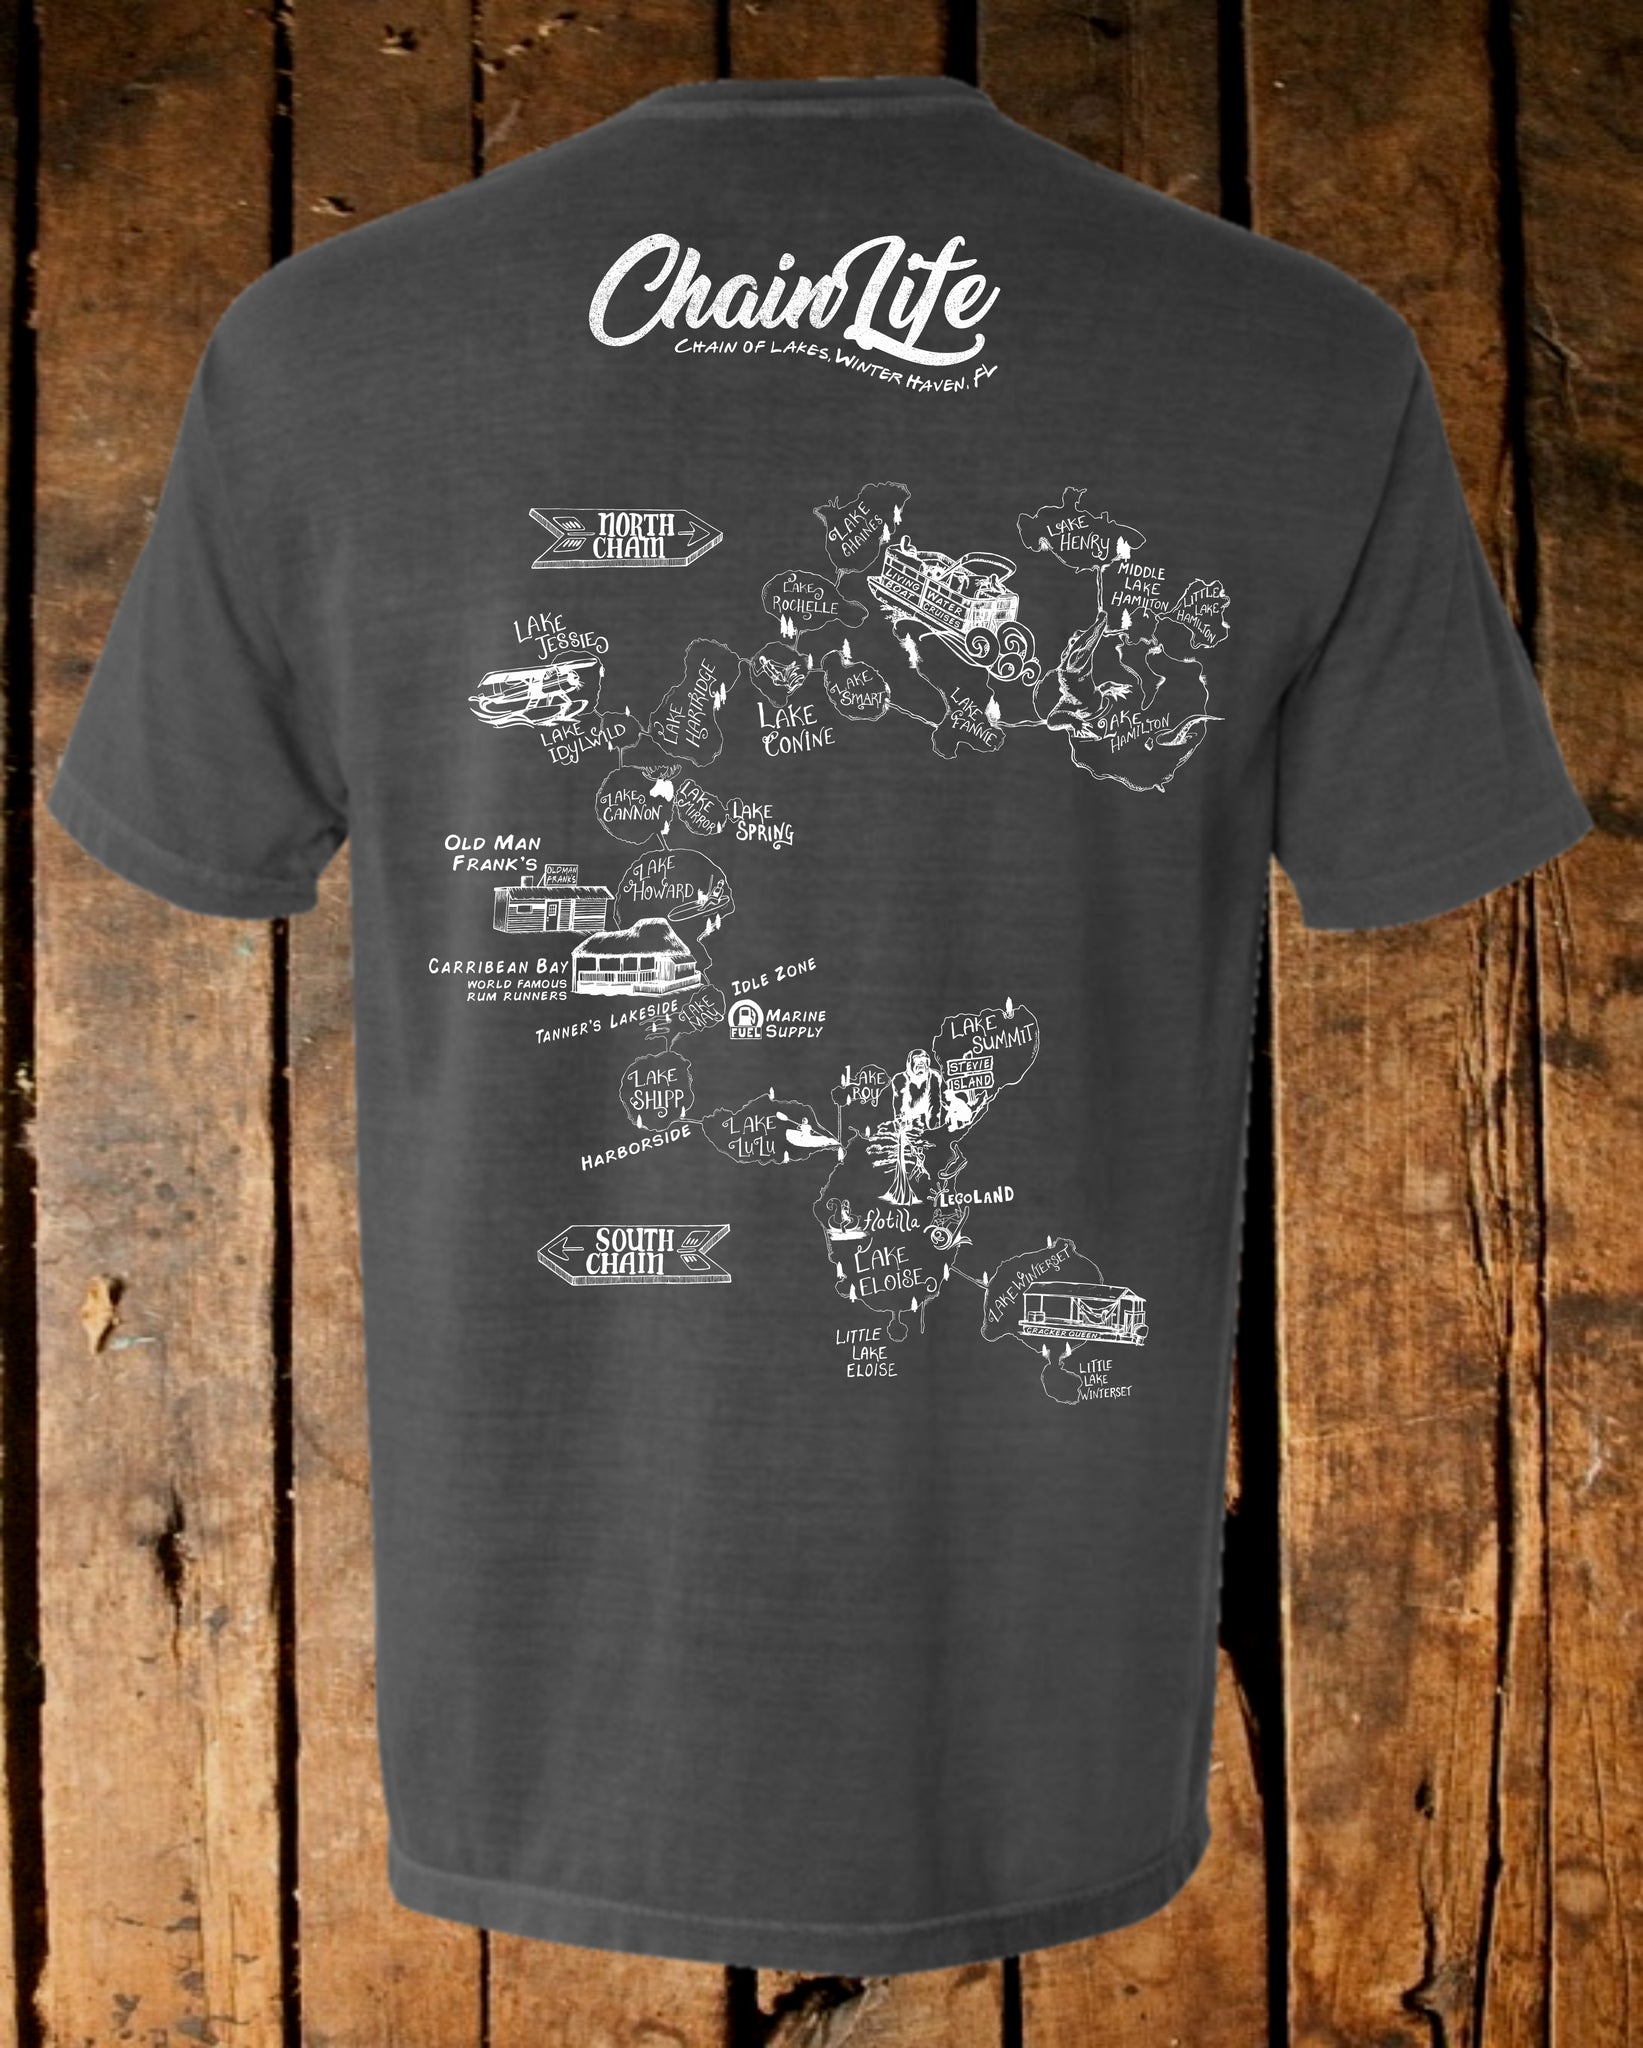 Chain of Lakes Coordinates Tee Shirt with Chain of Lakes Map